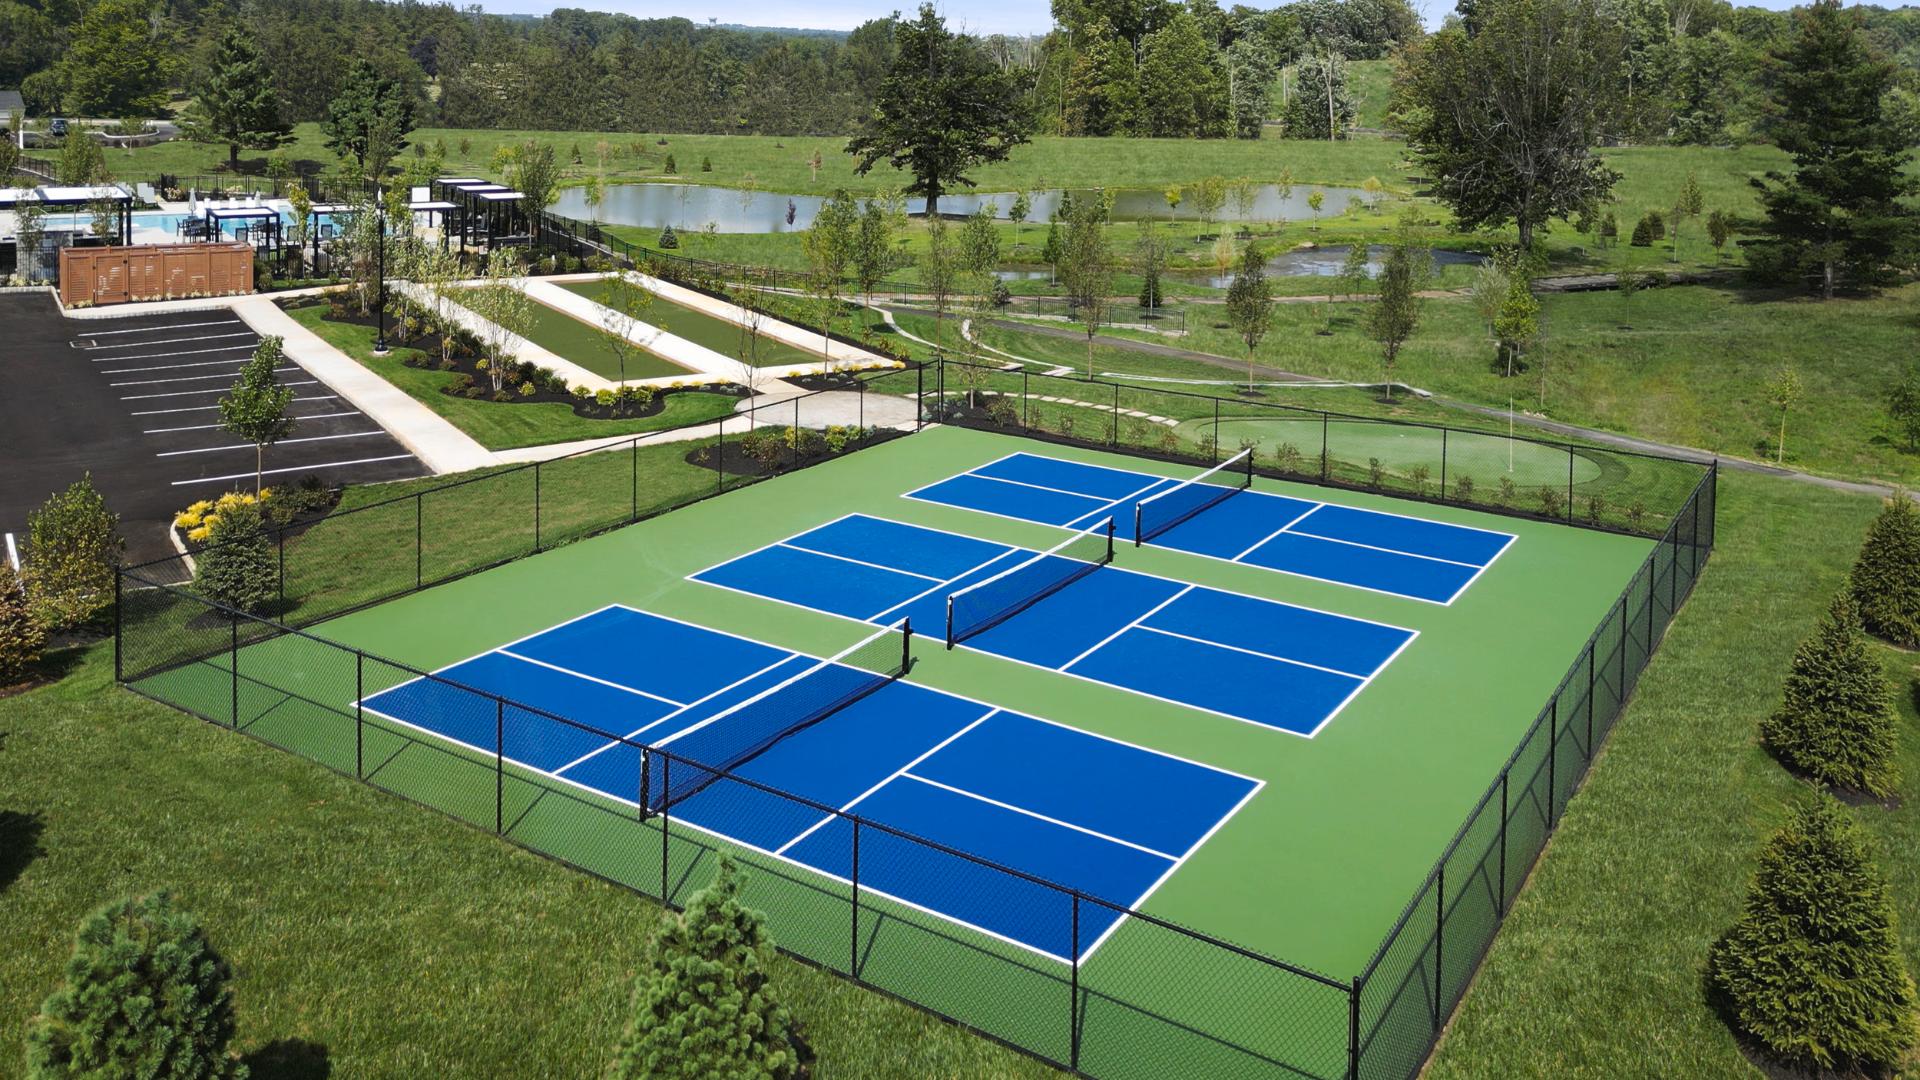 Pickleball, putting green, and bocce courts